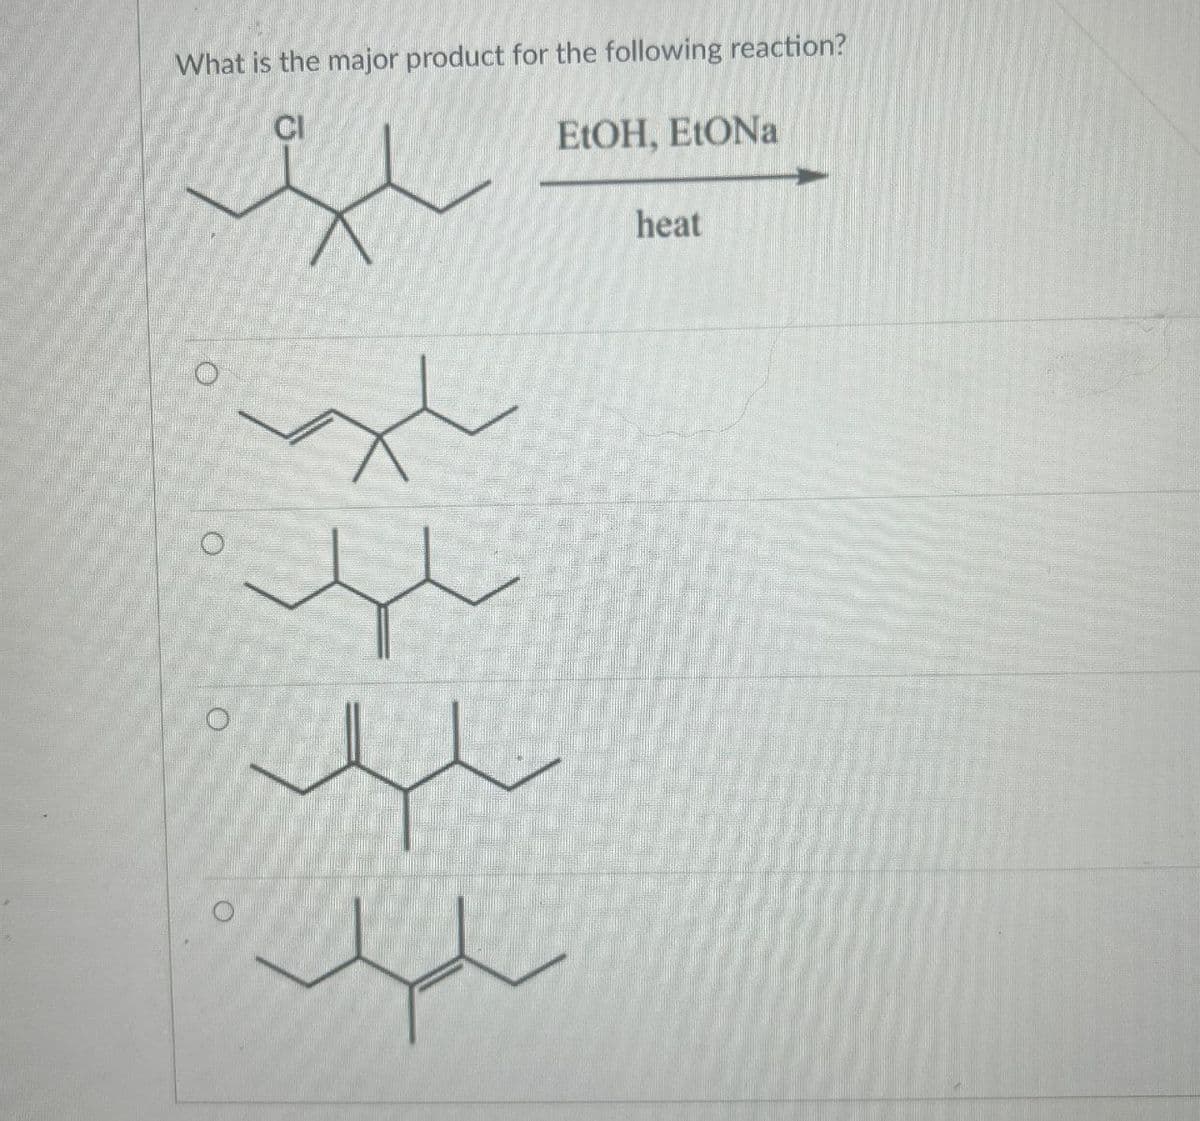 What is the major product for the following reaction?
CI
EtoH, EtoNa
heat